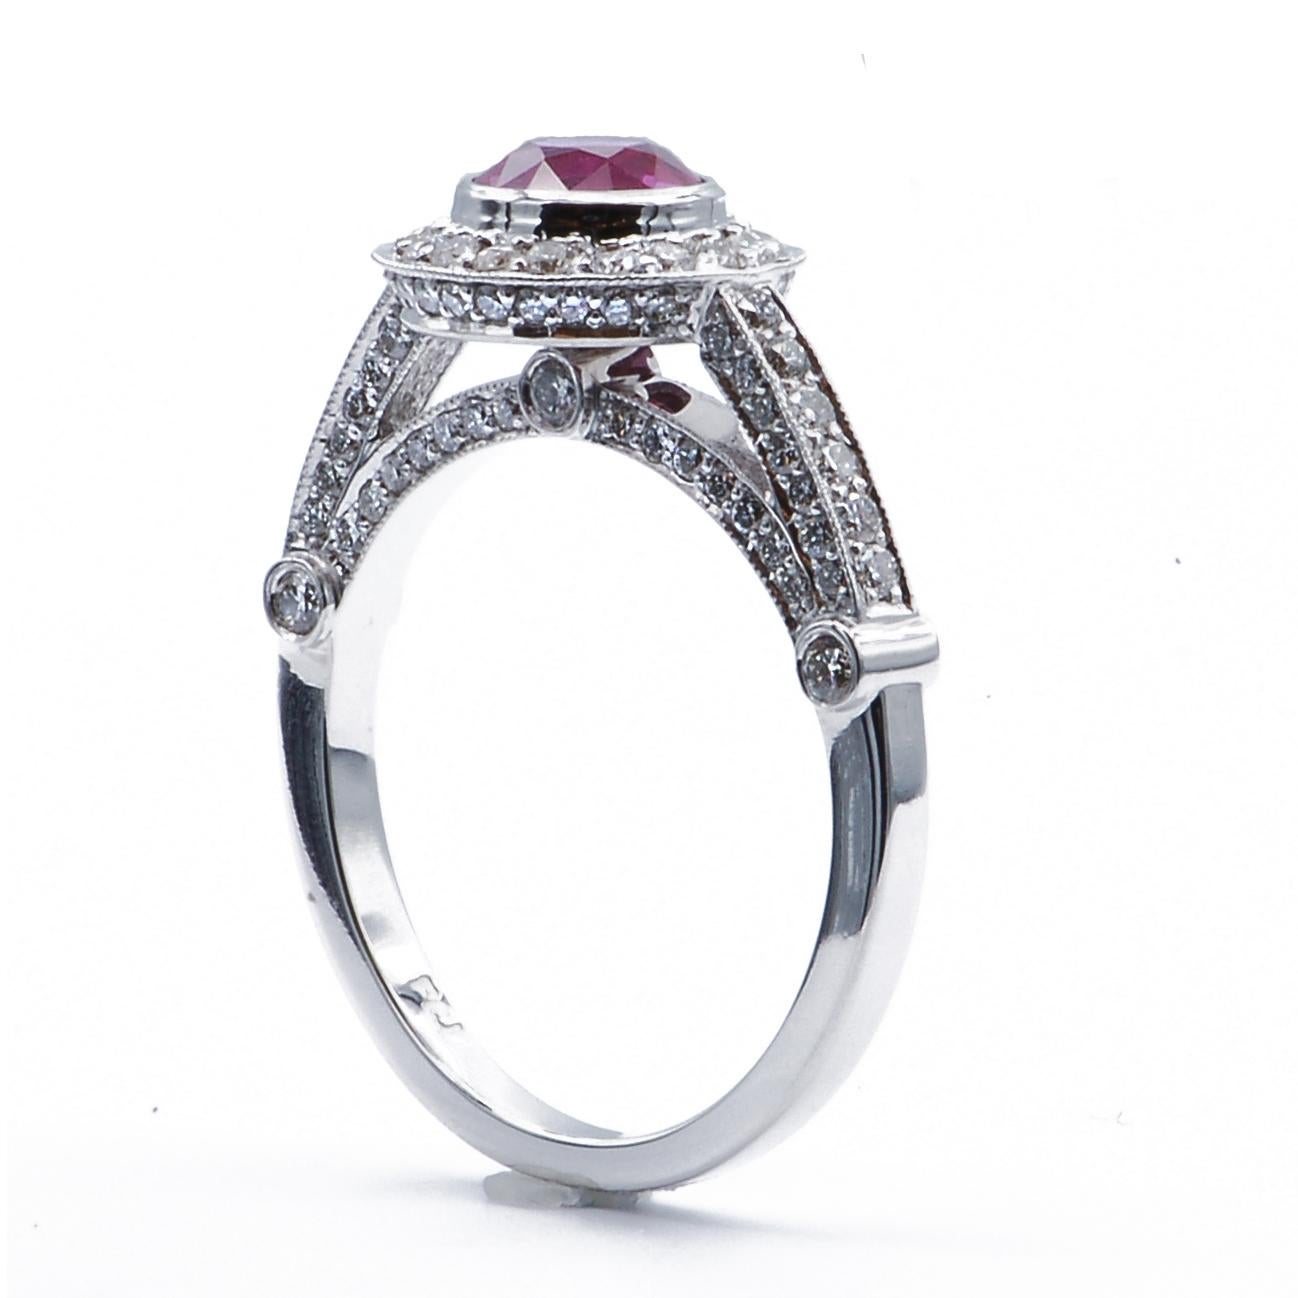 A stunning 18k white gold ring has a vibrant round 1.35 carat Pink Sapphire in the center with a pavé halo.  A row of pavé goes down the sides of the ring on all three side  and across the bridge.  There is an added touch with bezel set stones on